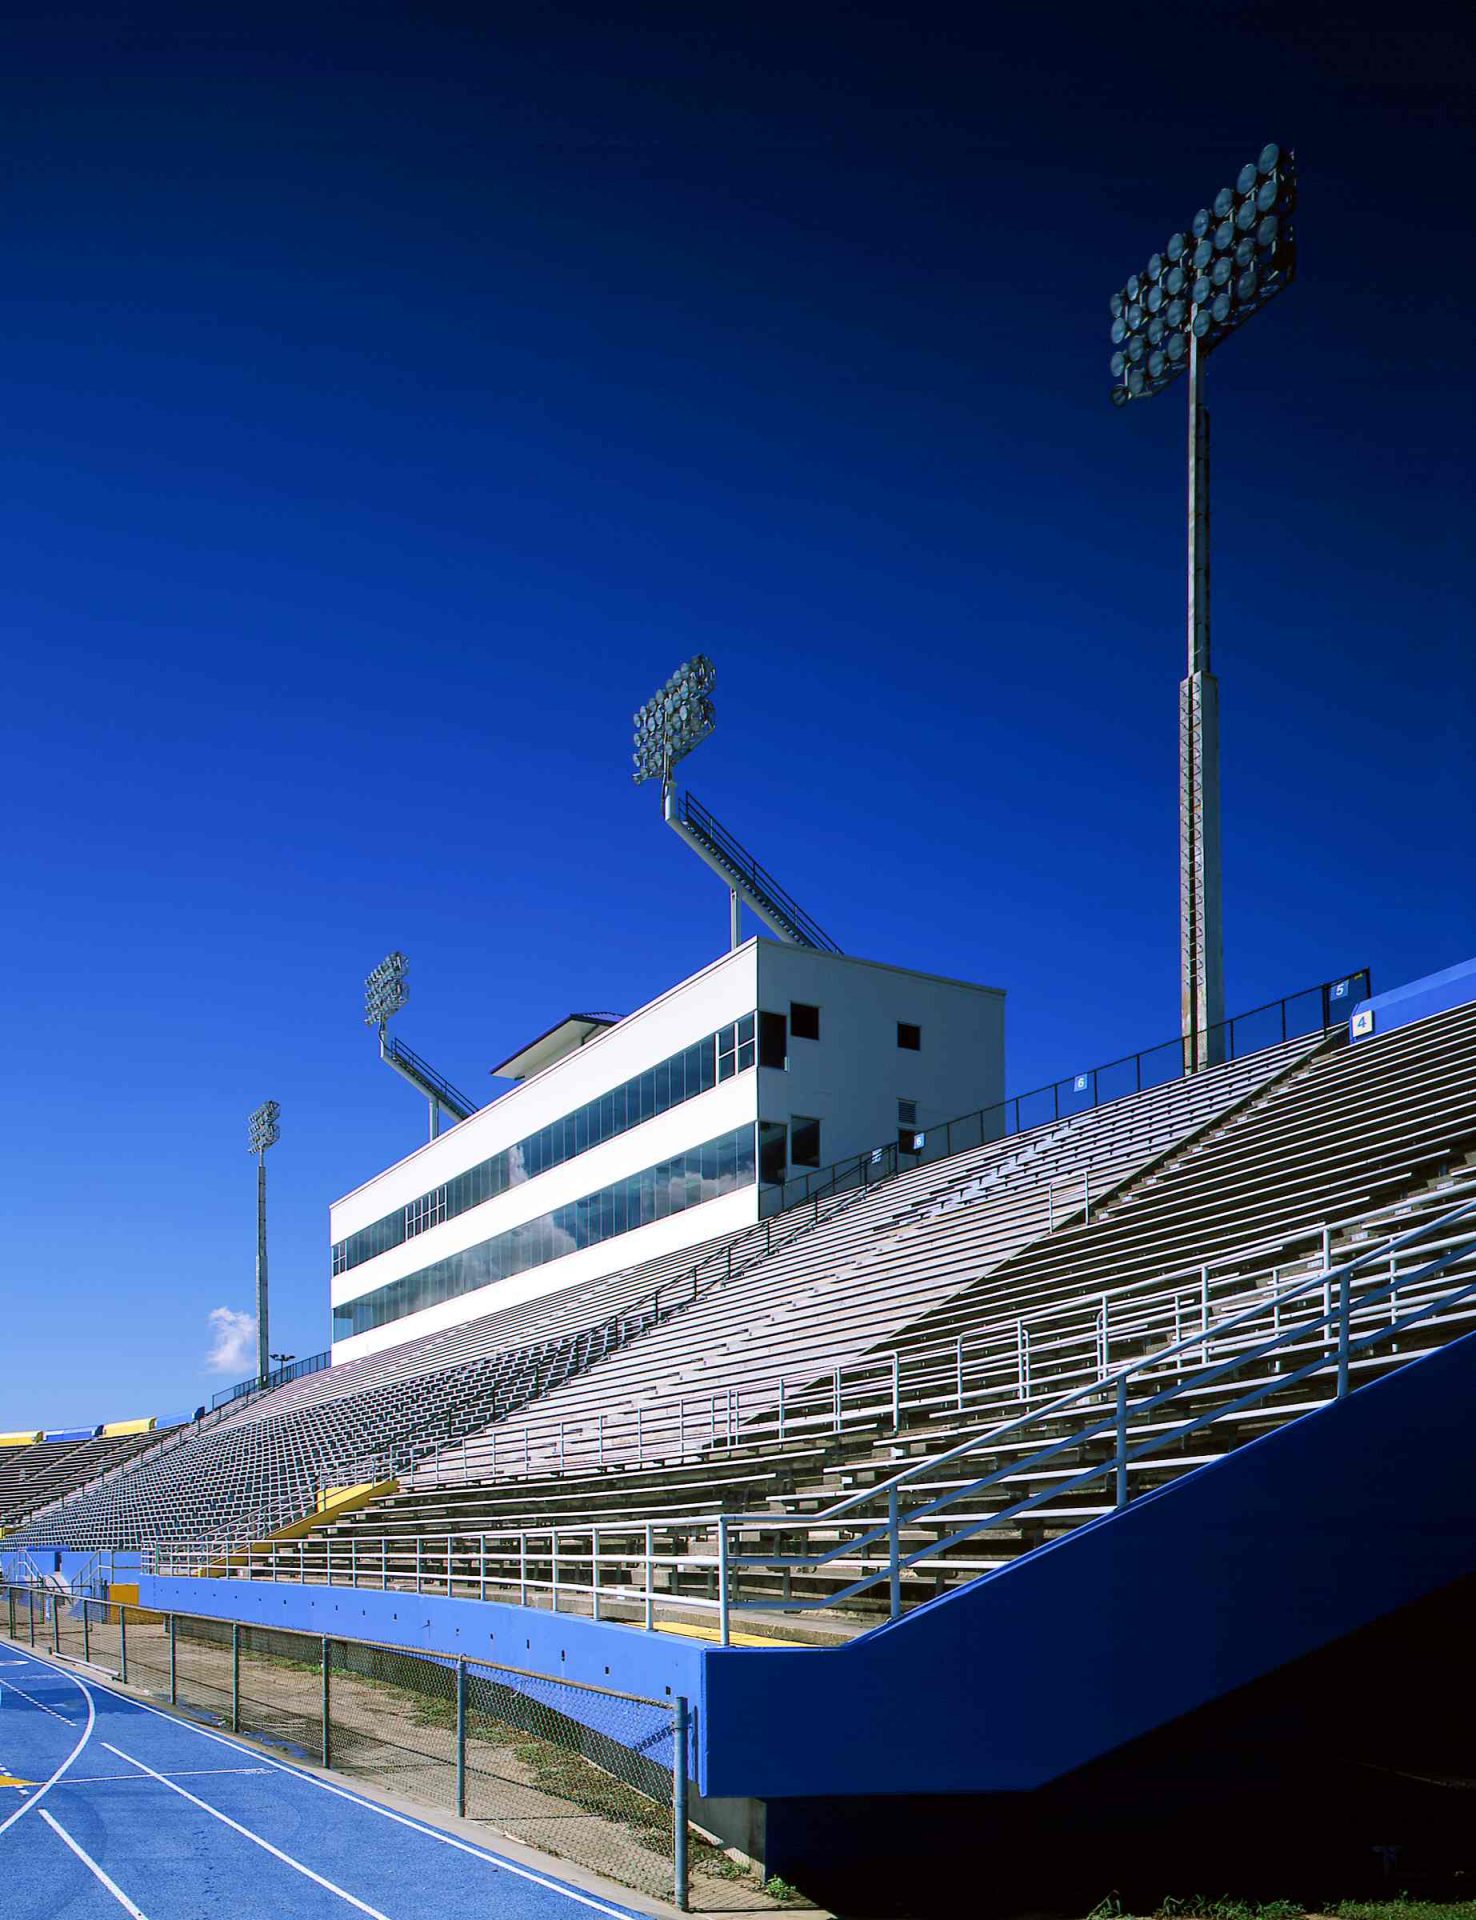 Exterior view of the press box and stadium.